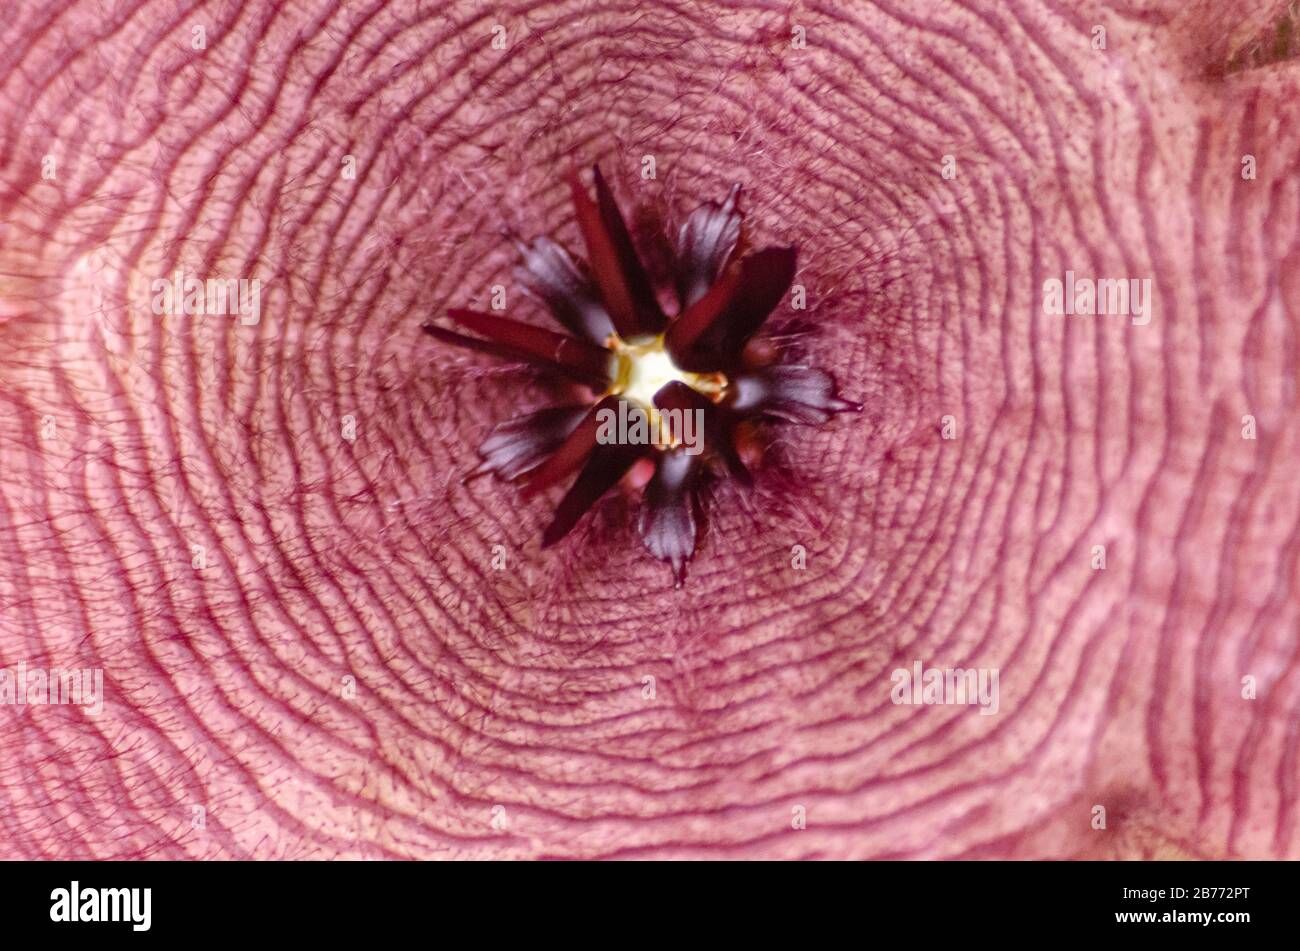 Close-up of a cactus stapelia hairy flower open Stock Photo